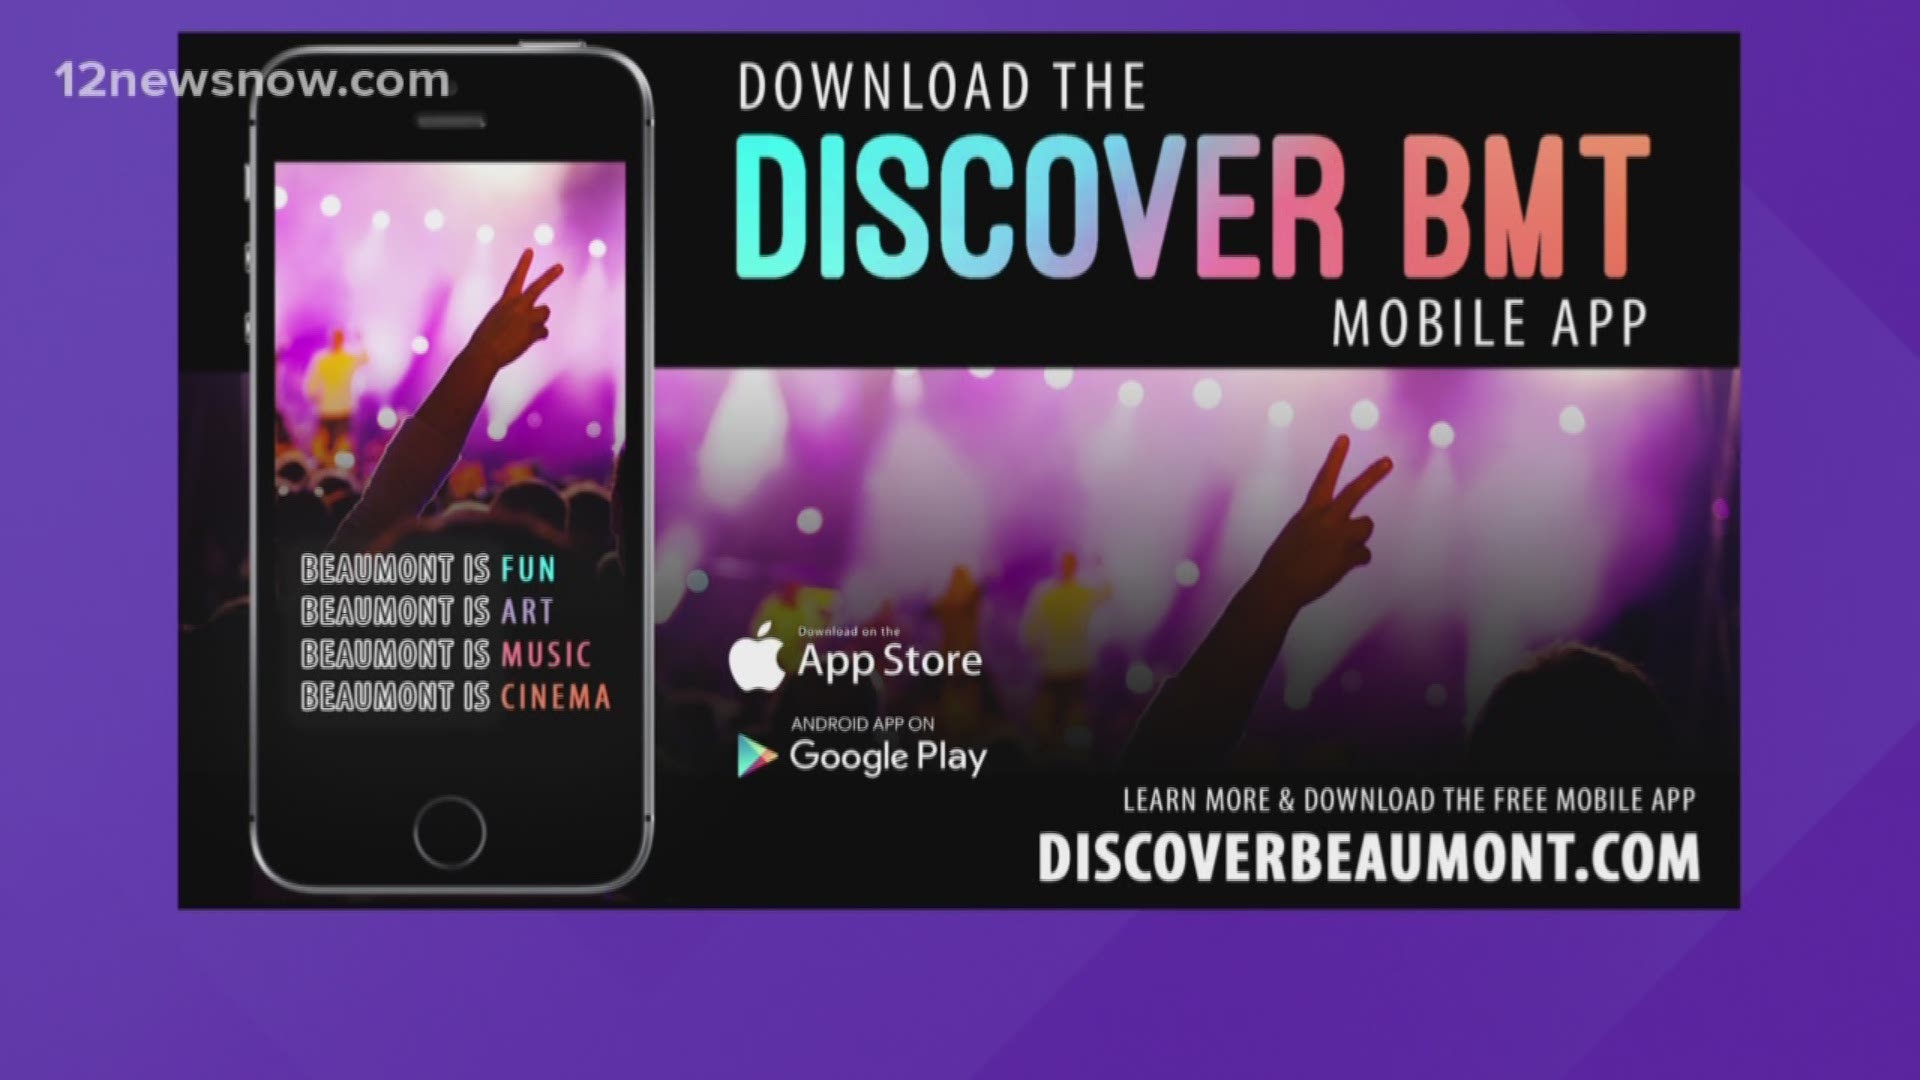 For more event information visit discoverbeaumont.com or download the Discover BMT app.